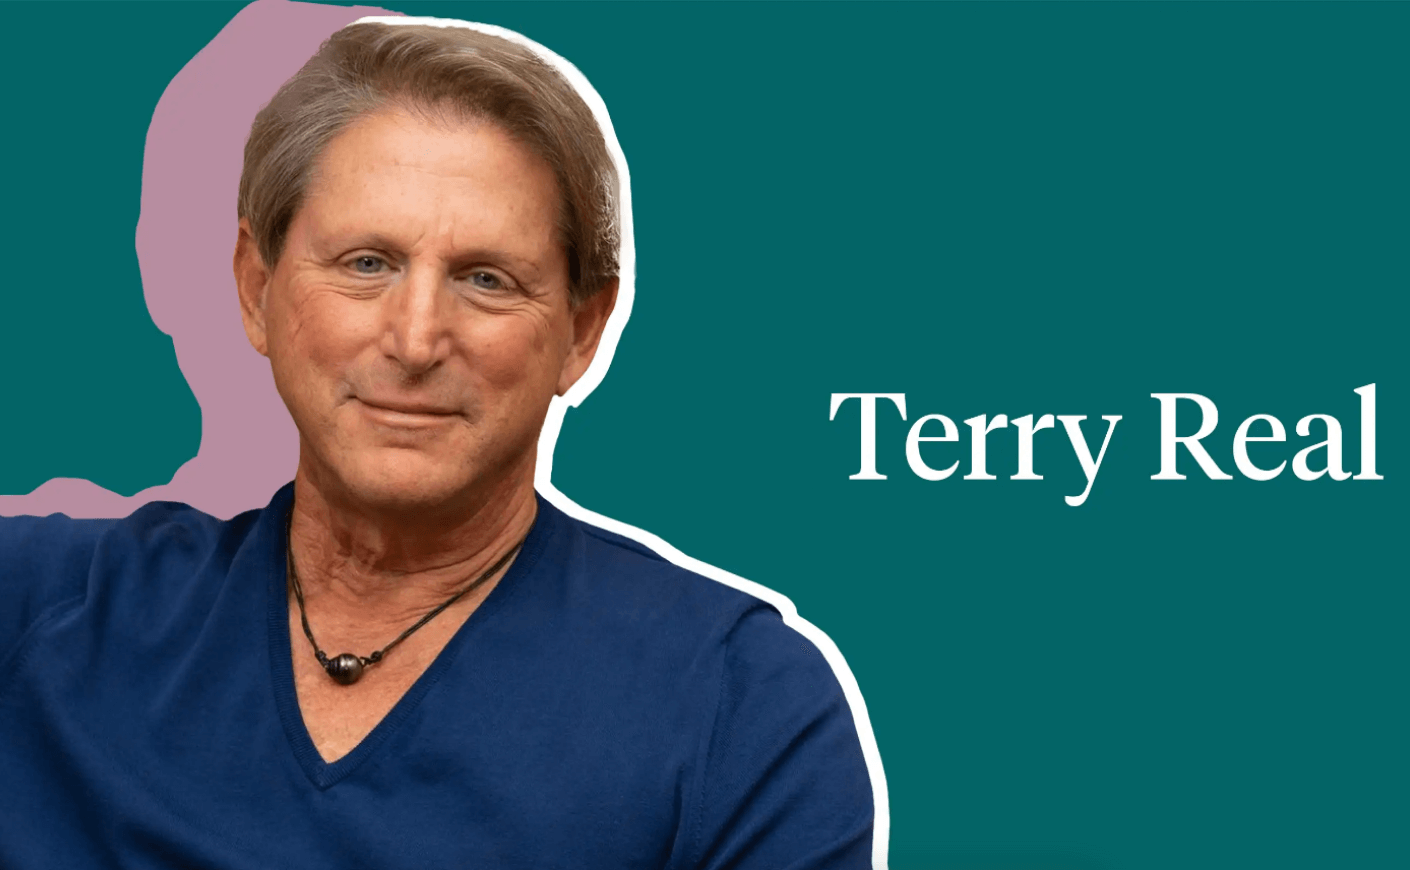 Terry Real Image